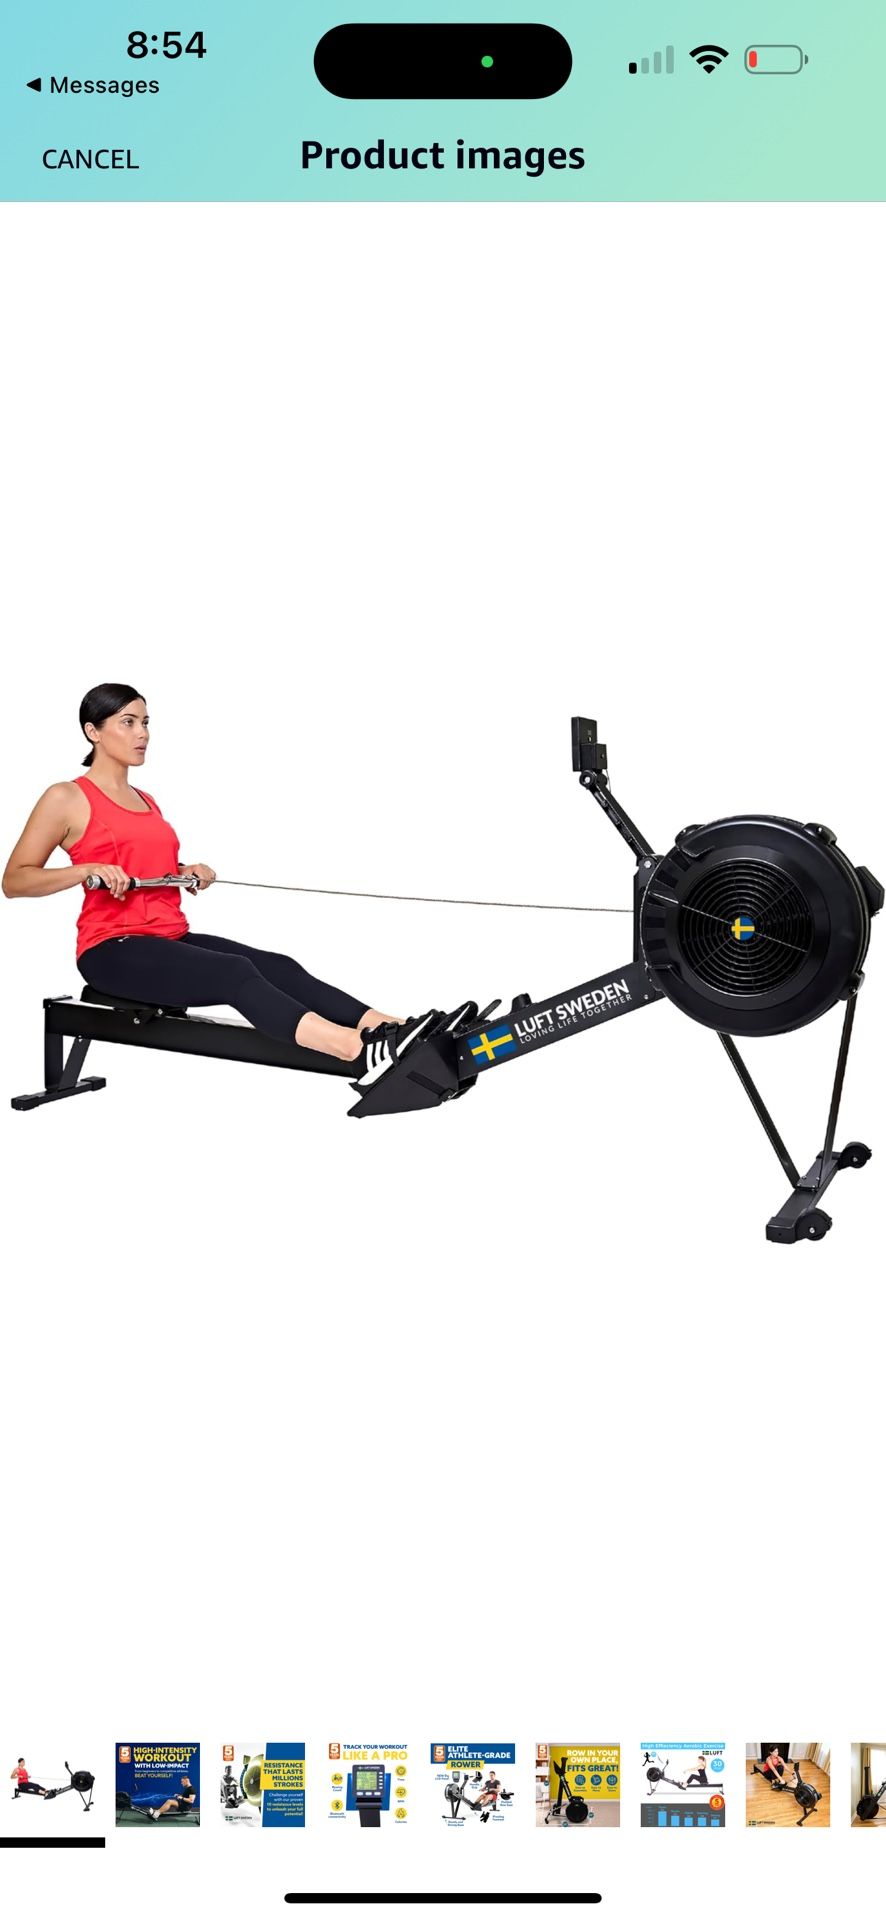 Rowing Machine | Home Gym Equipment for Cardio Training and Fat Burning Swedish Engineering - Indoor Workout - 10 Adjustable Resistance Levels